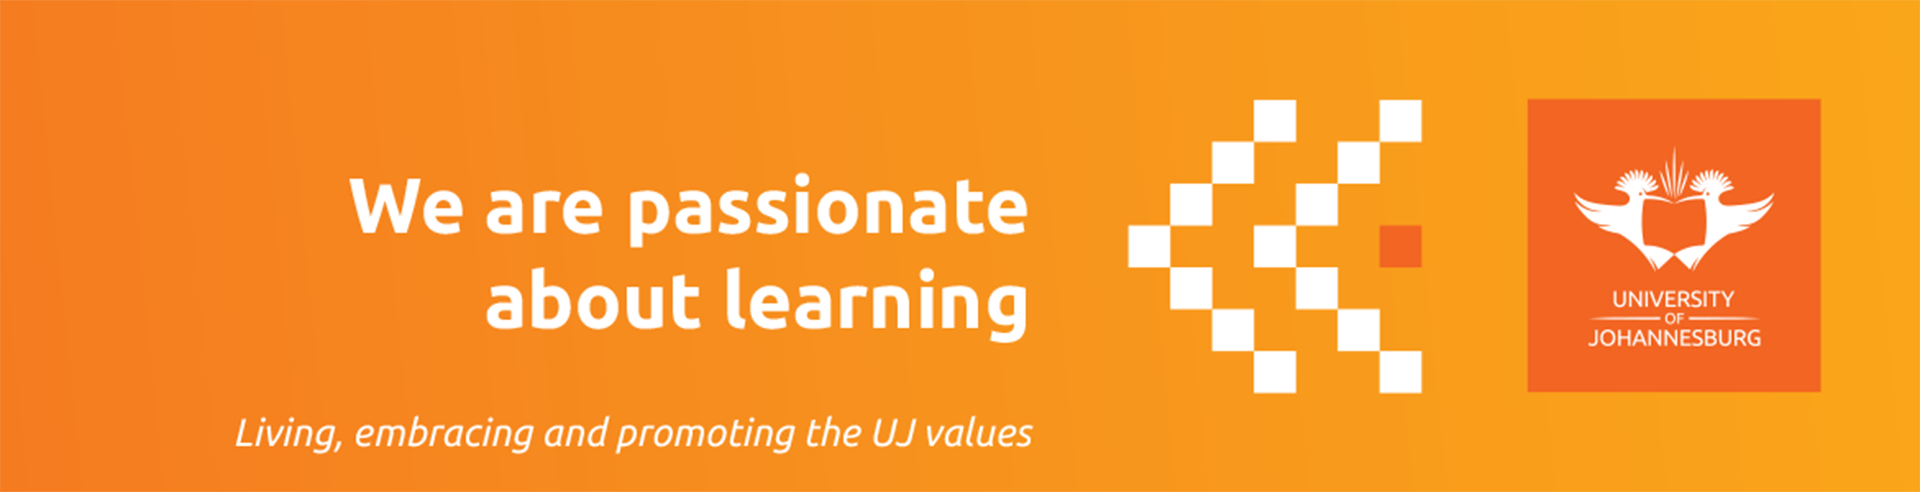 Uj Values Expressions Posters 2020 Ulink 1170x300mm 13